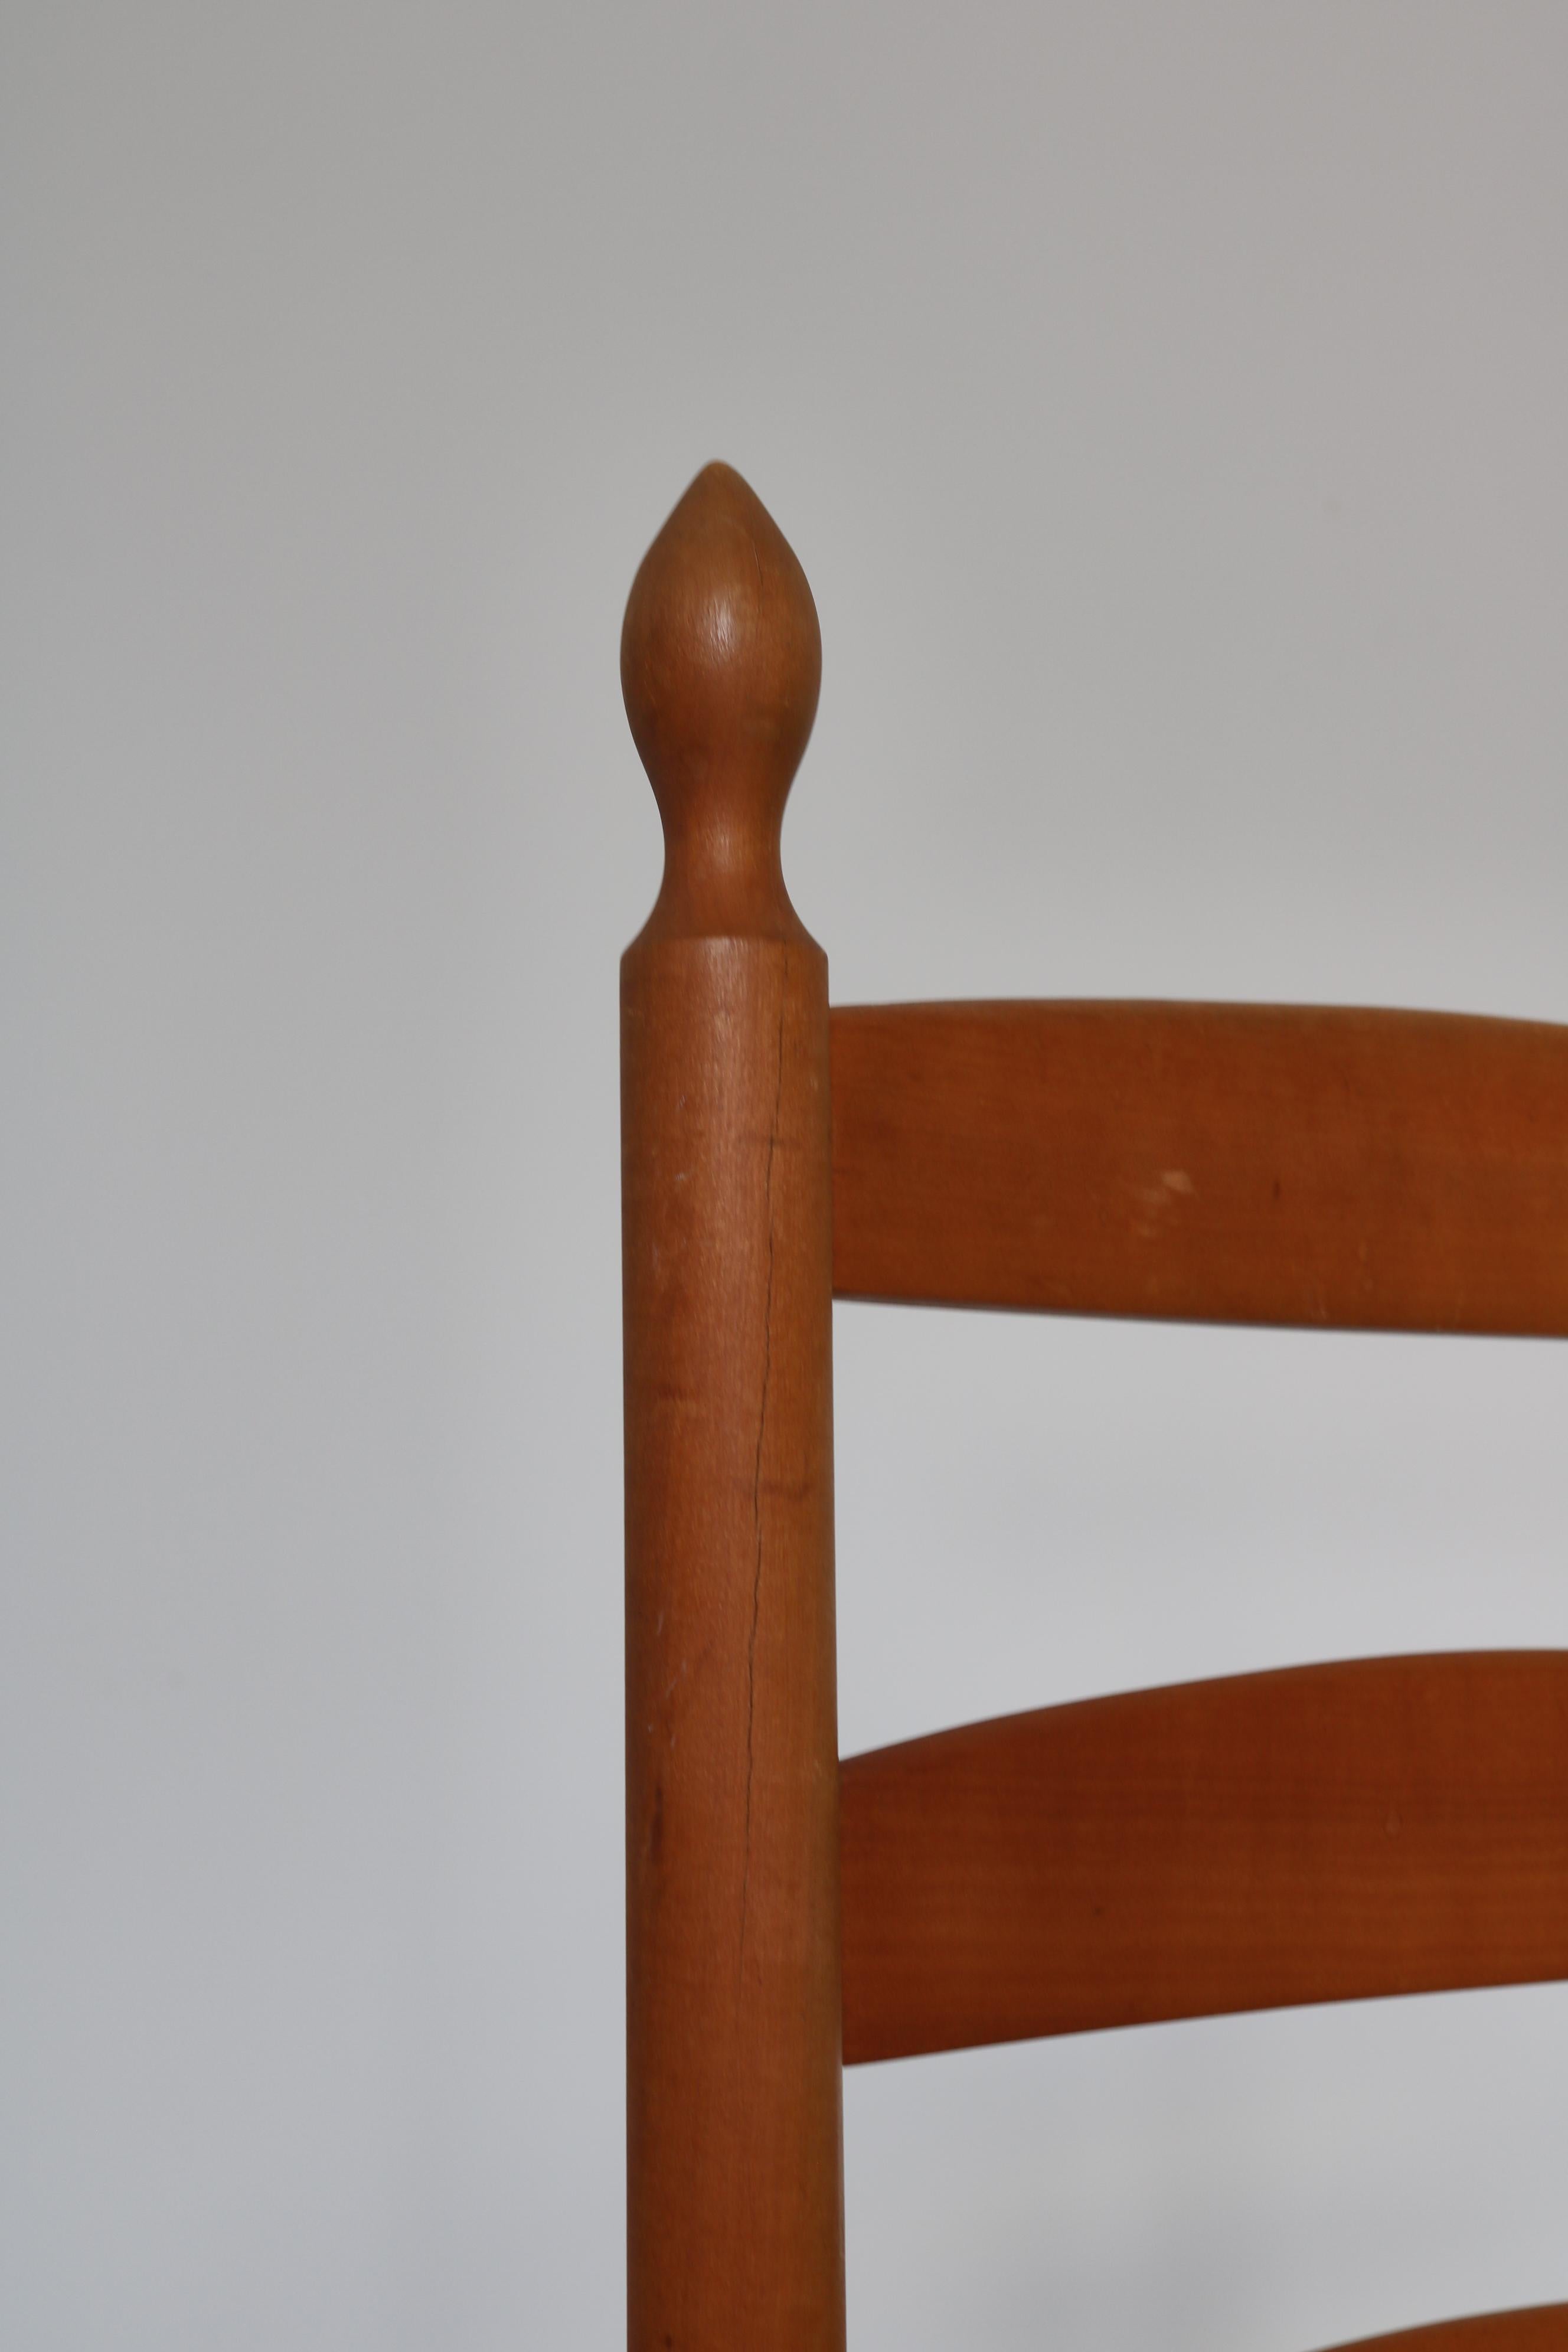 Vintage Scandinavian Shaker Chair in Beech and Leather Seat, Denmark, 1960s For Sale 6